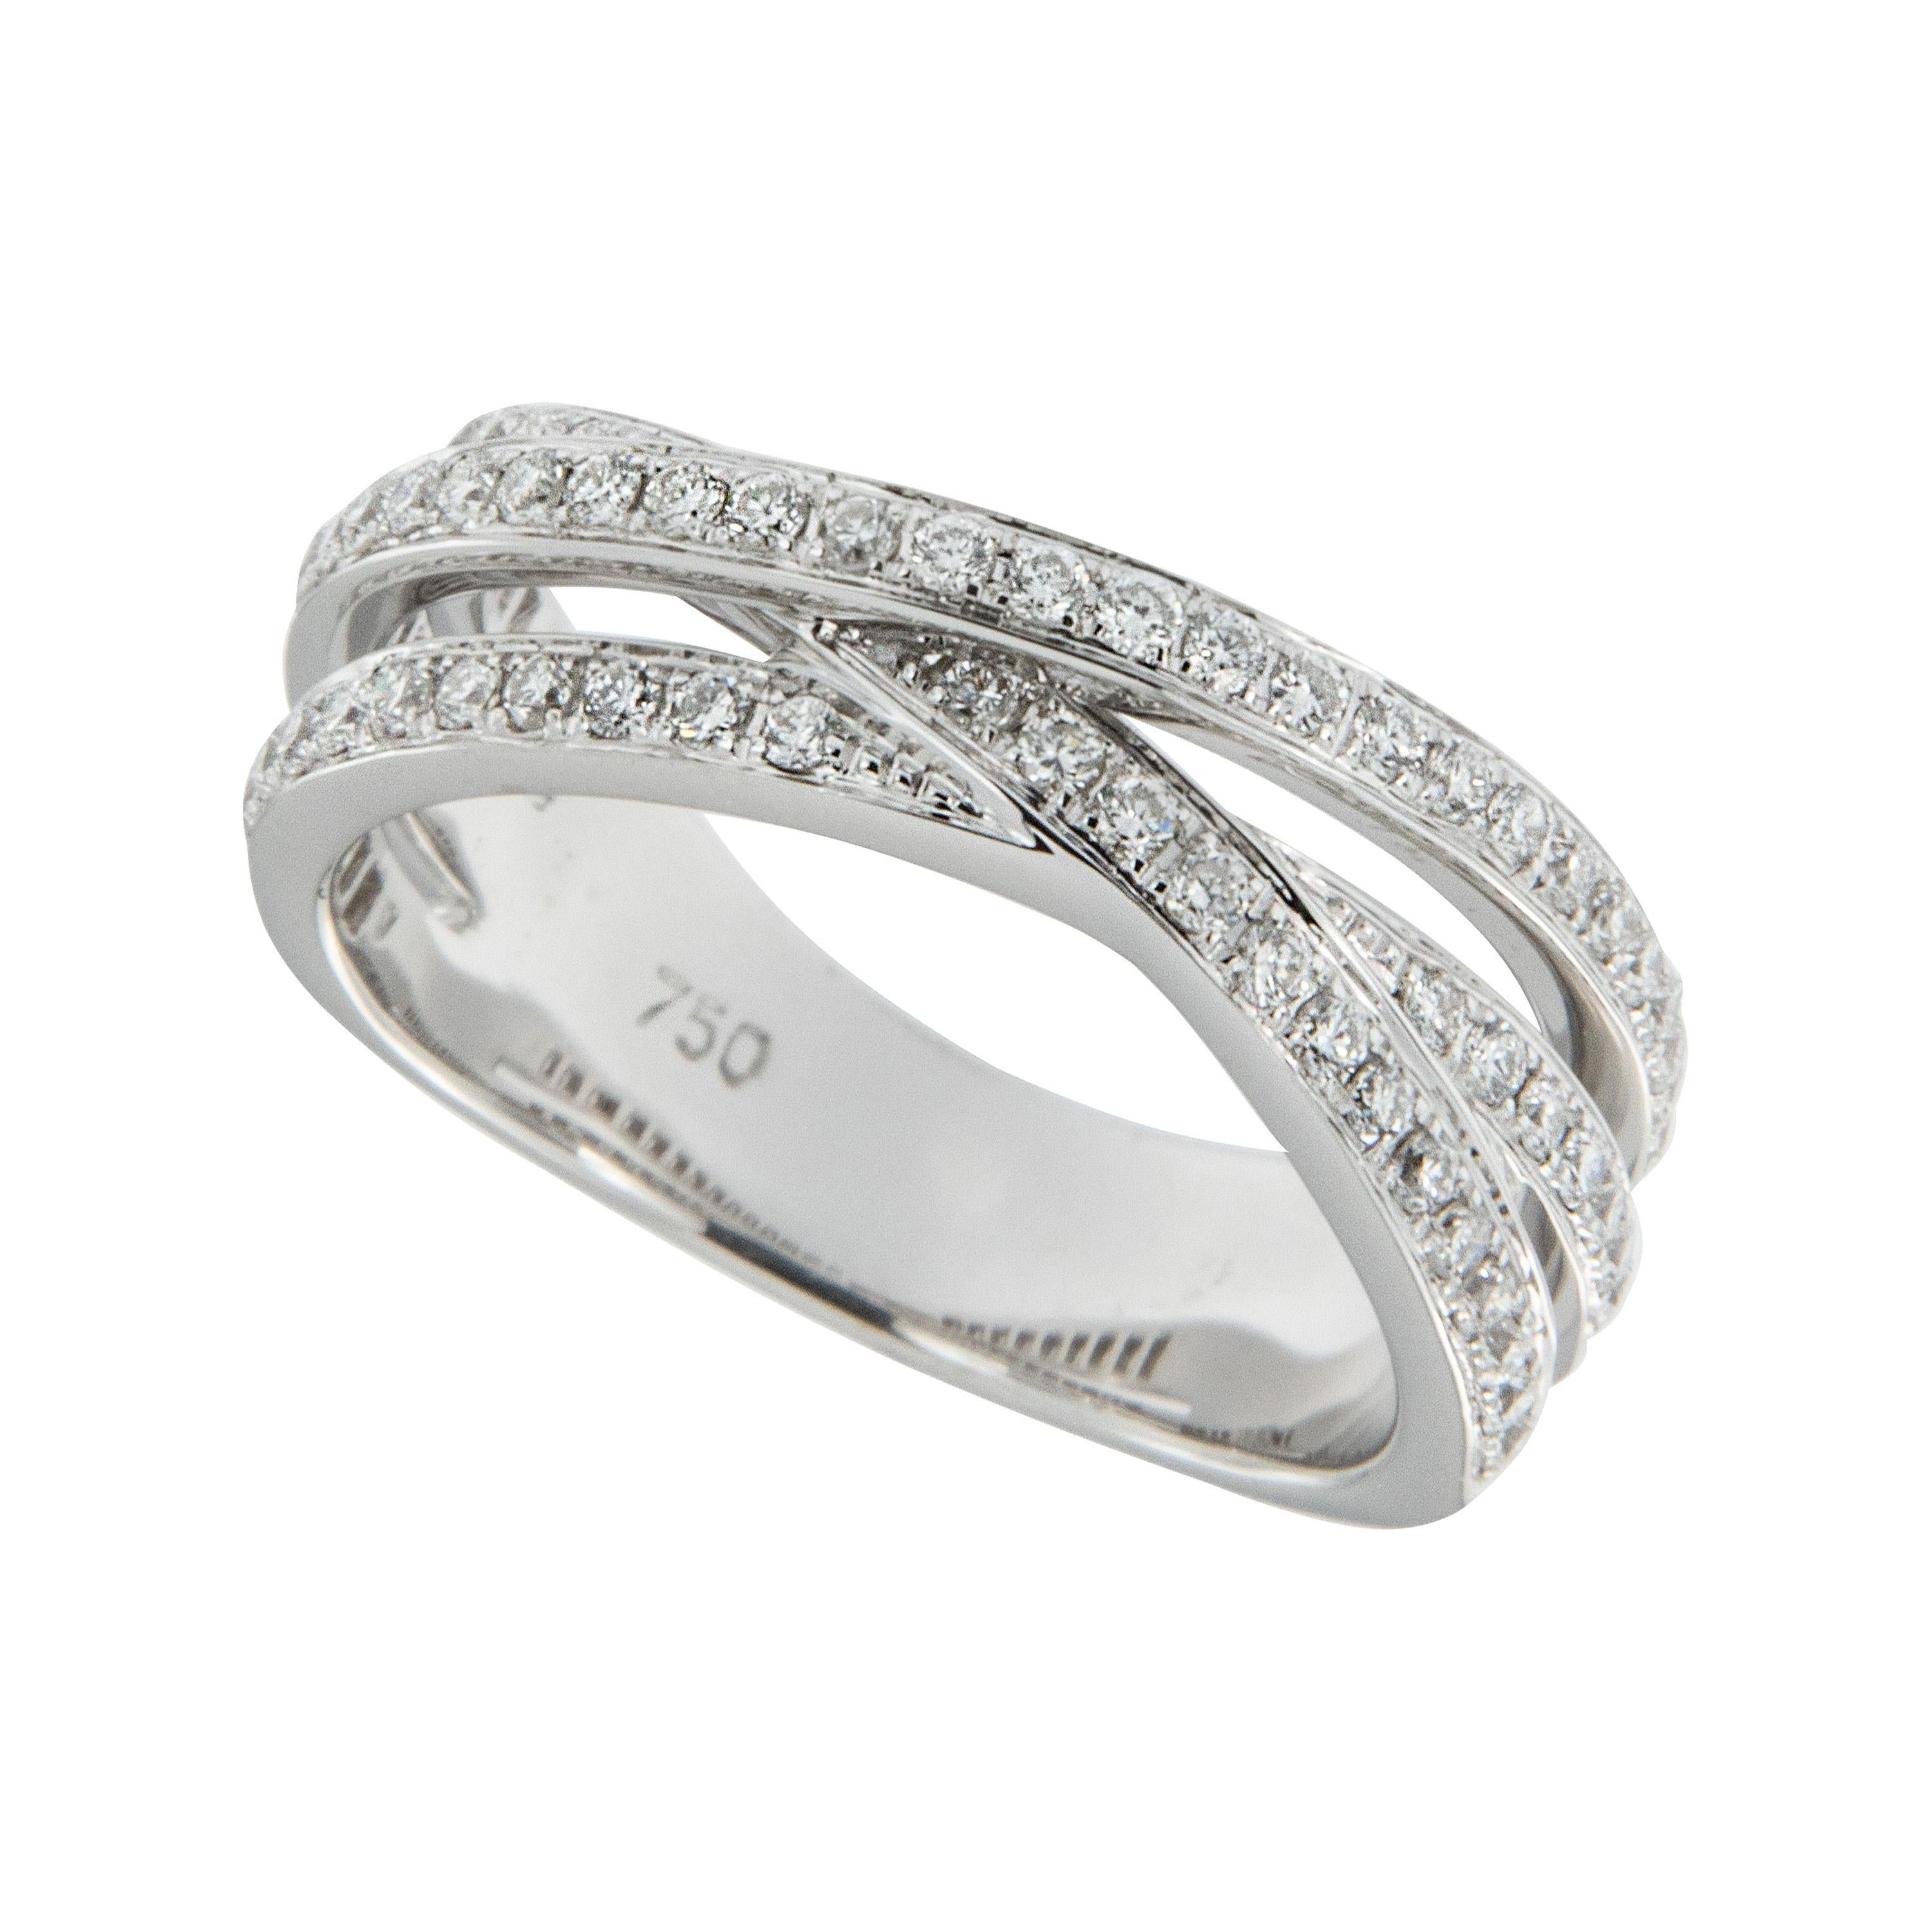 This three rowed crossover band is sure to please with 0.43 Cttw diamonds that can be worn as an anniversary band or as a right hand fashion ring. Made in Switzerland of fine 18 karat white gold in a size 4.5.